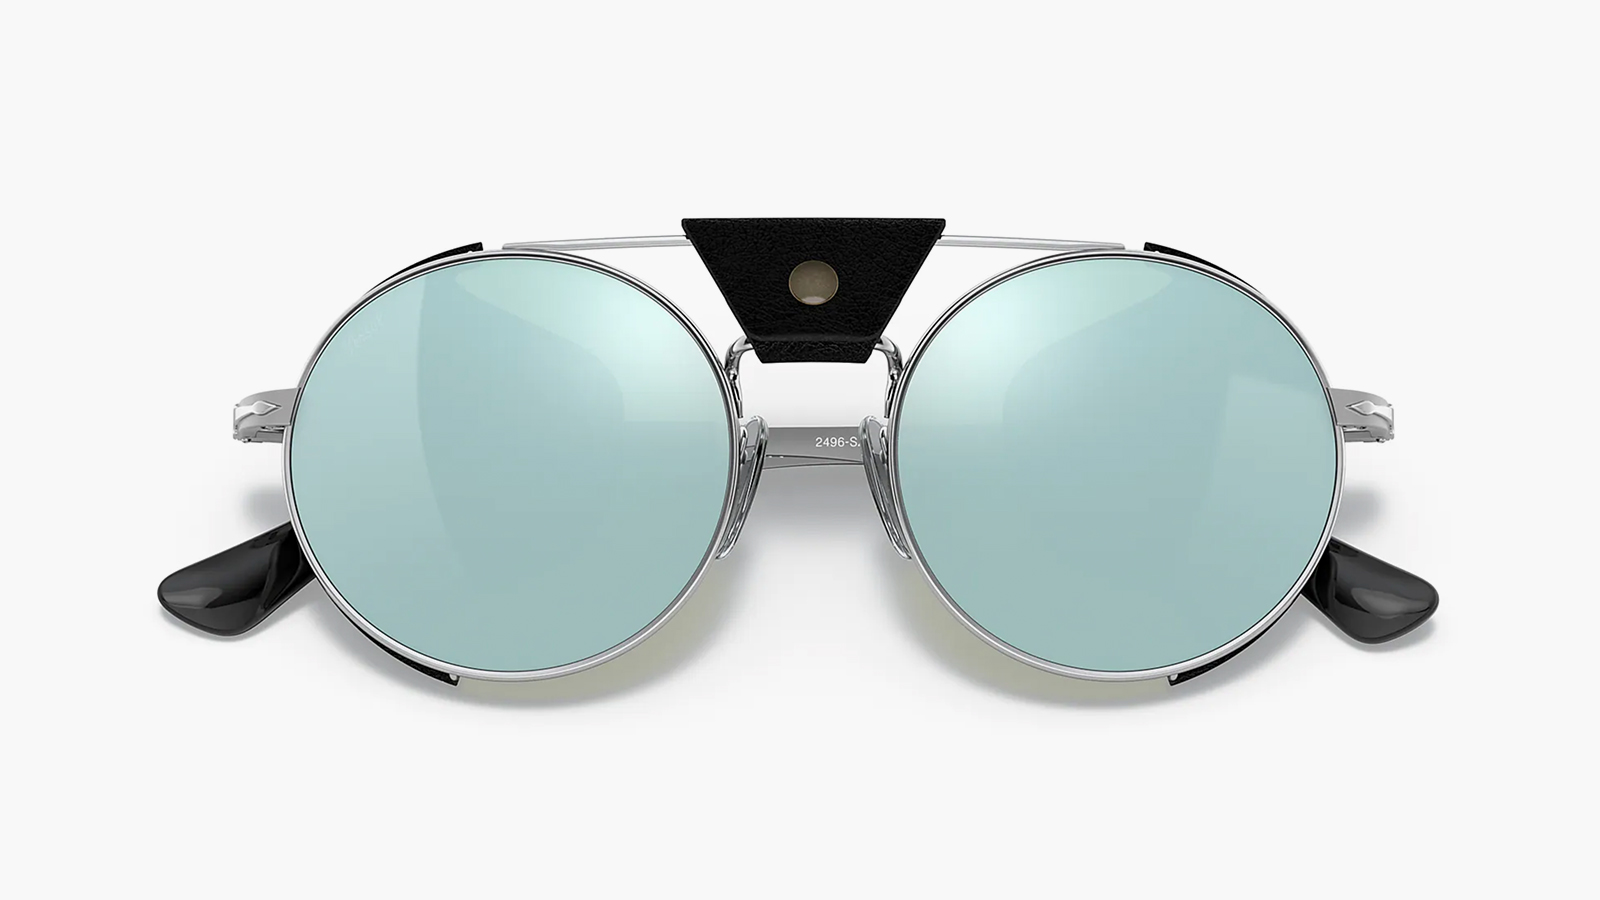 Referencing Its 1917 Design, Persol Drops The Protector - IMBOLDN